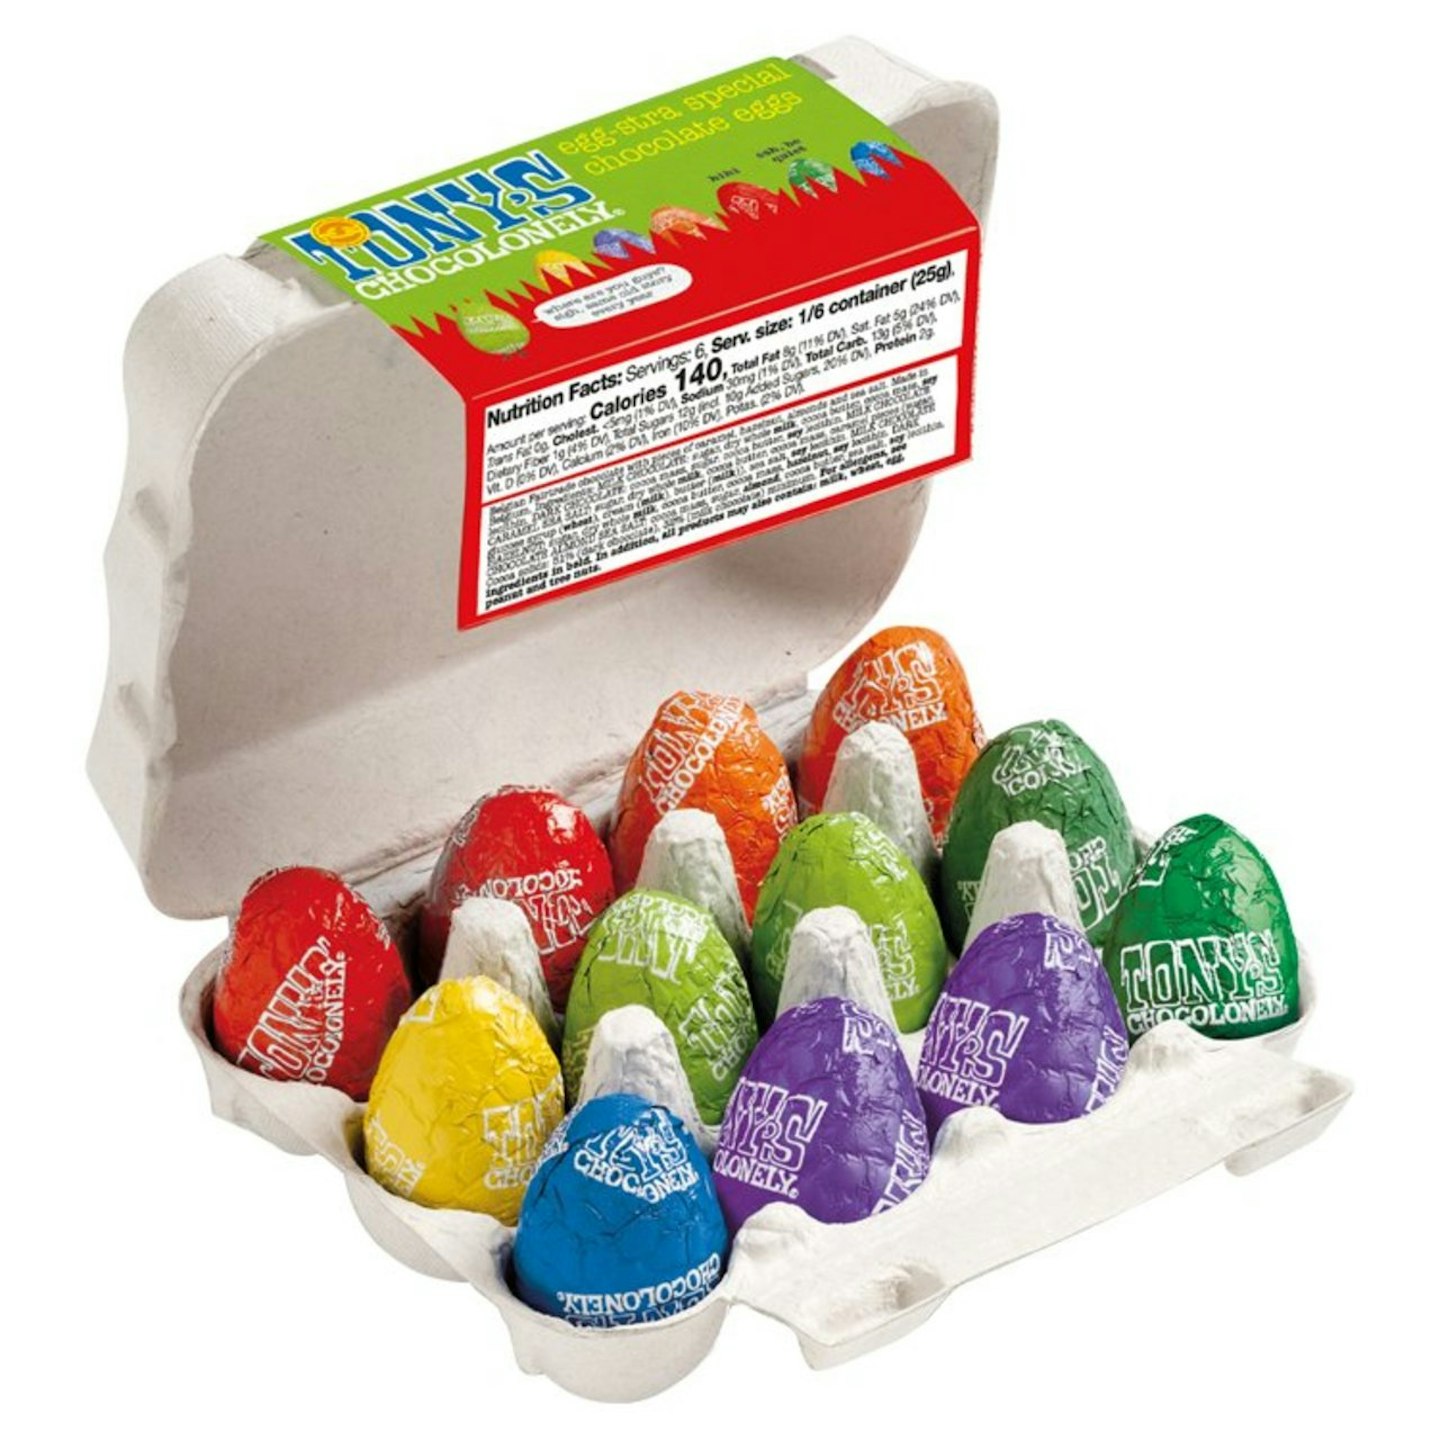 Tony's Chocolonely Chocolate Easter Eggs Assortment